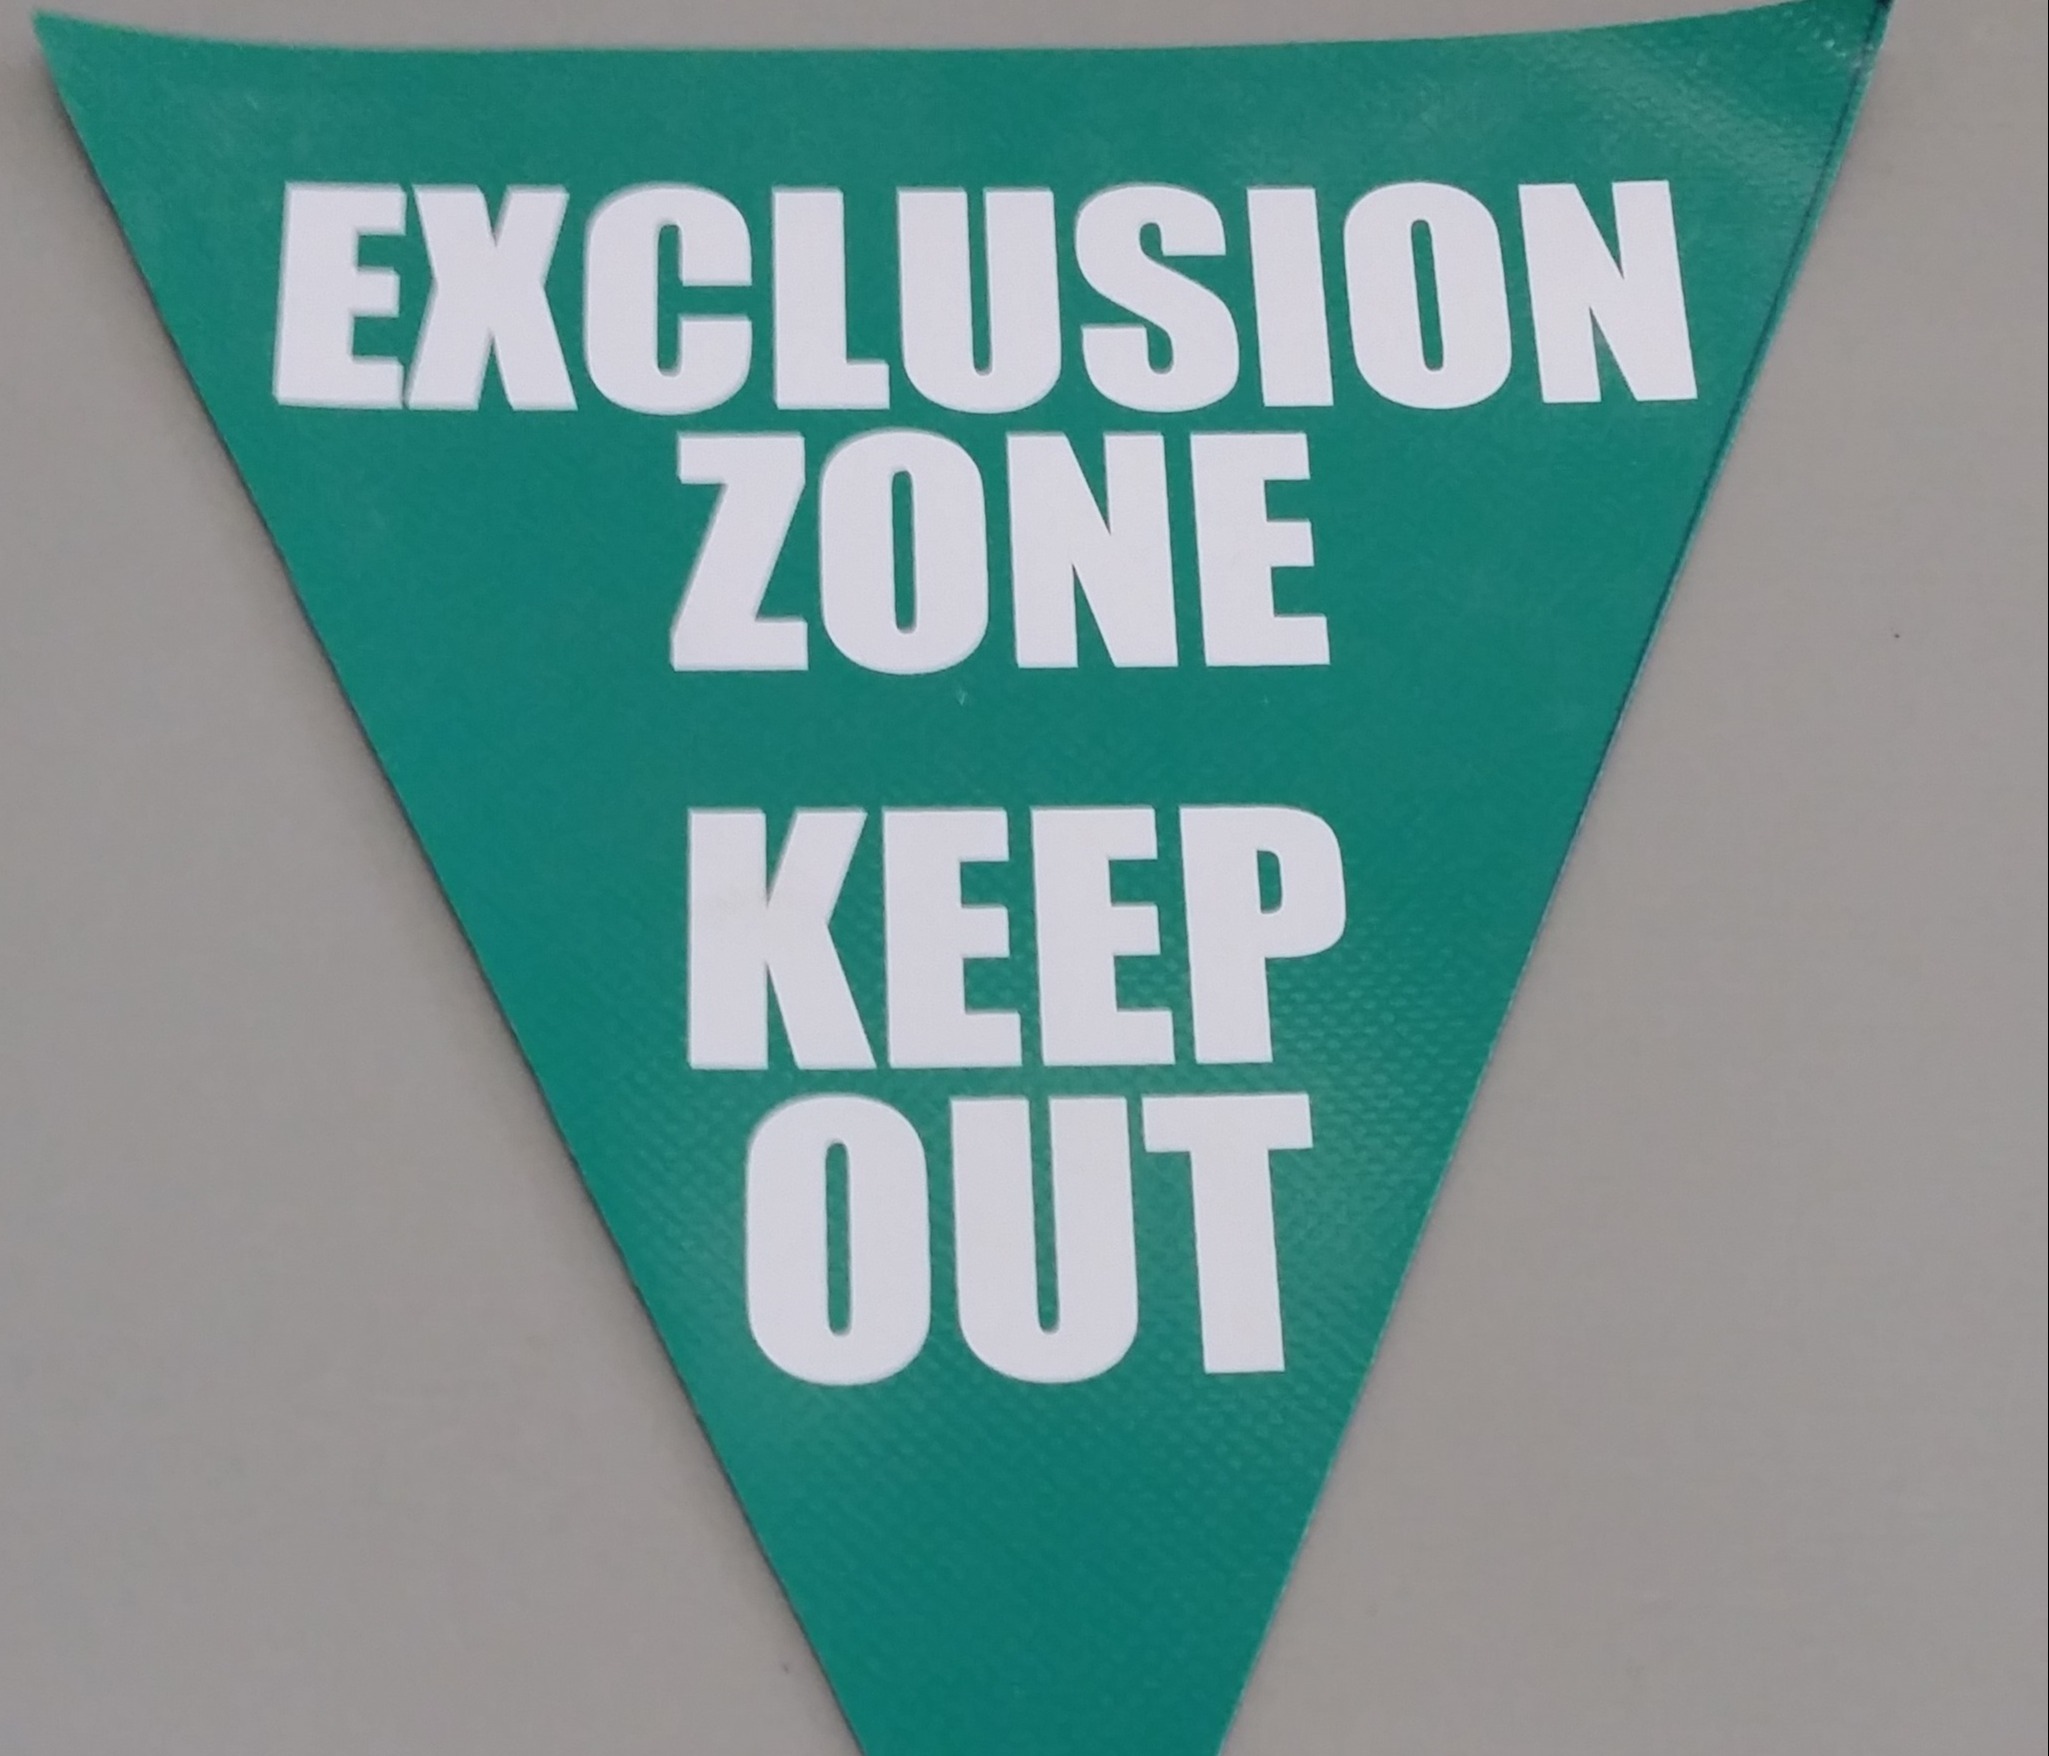 Exclusion Zone Keep Out(green with white print)